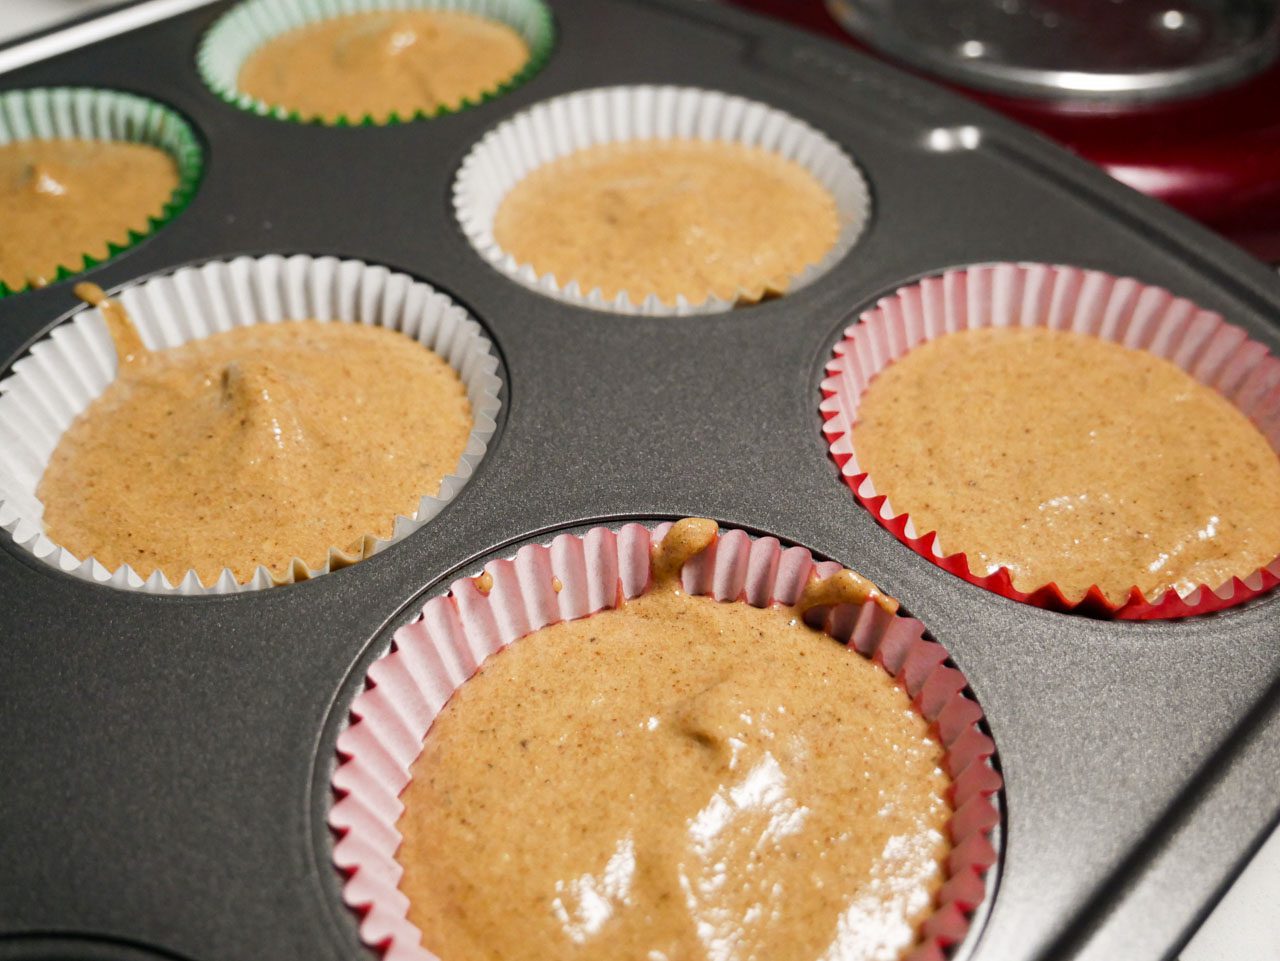 Gingerbread batter in cupcake molds